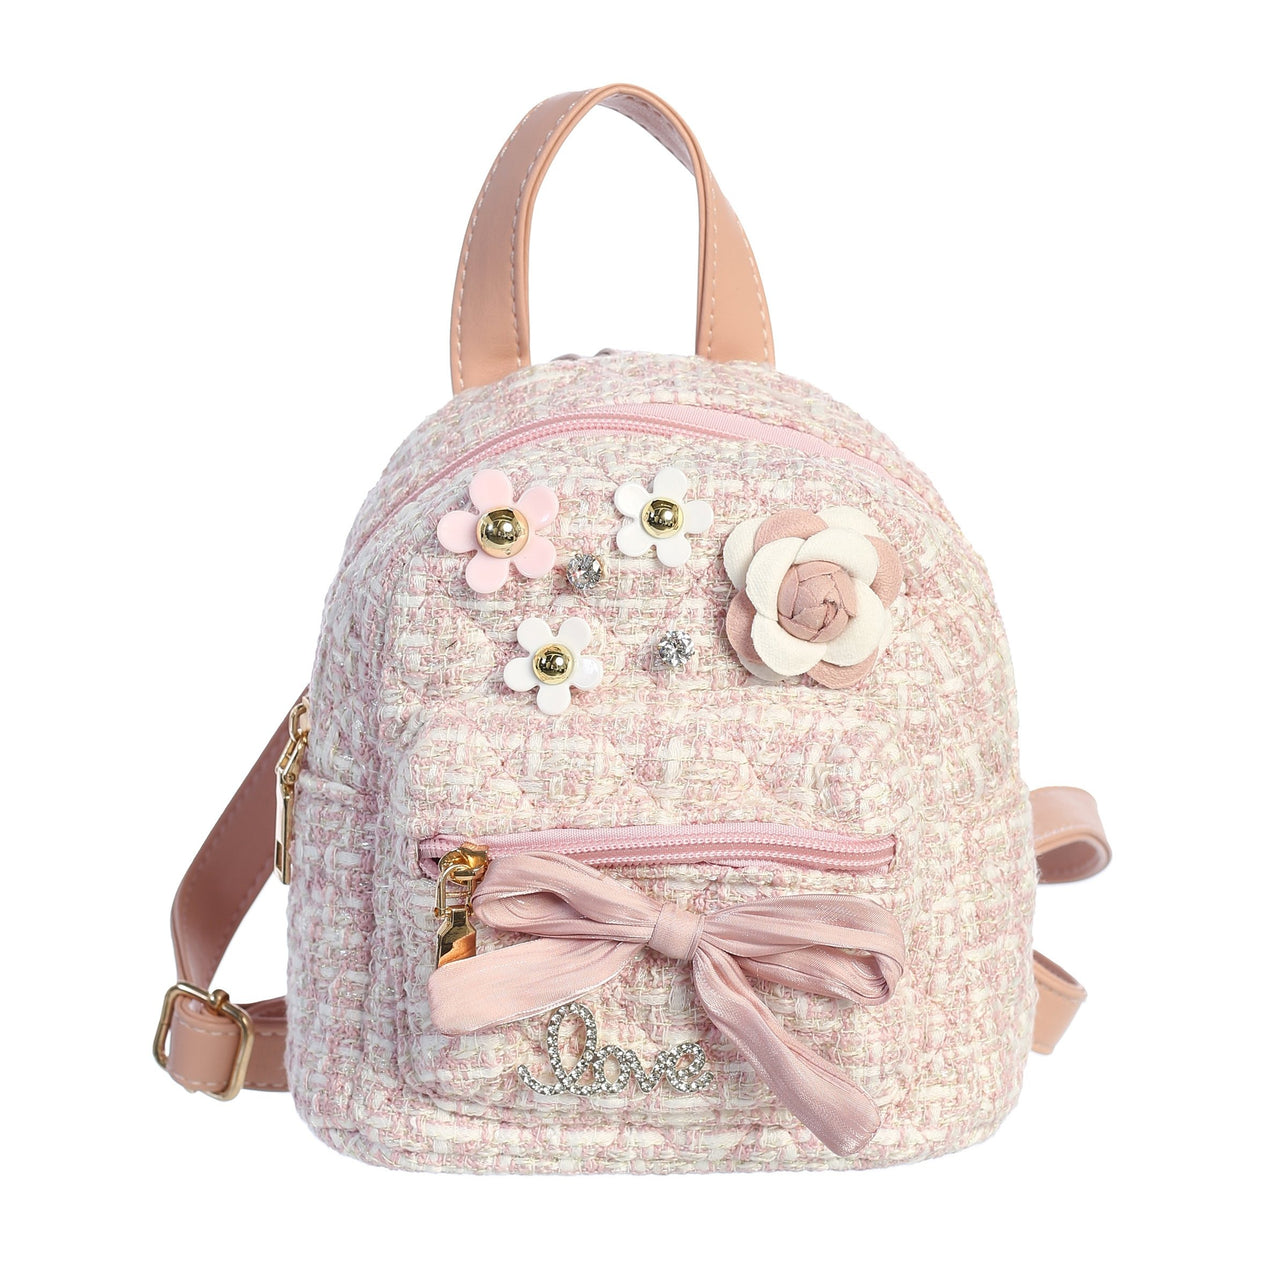 Cute Leather Princess Princess Backpack For Girls Small Purse School Bag  From Pang07, $13.6 | DHgate.Com